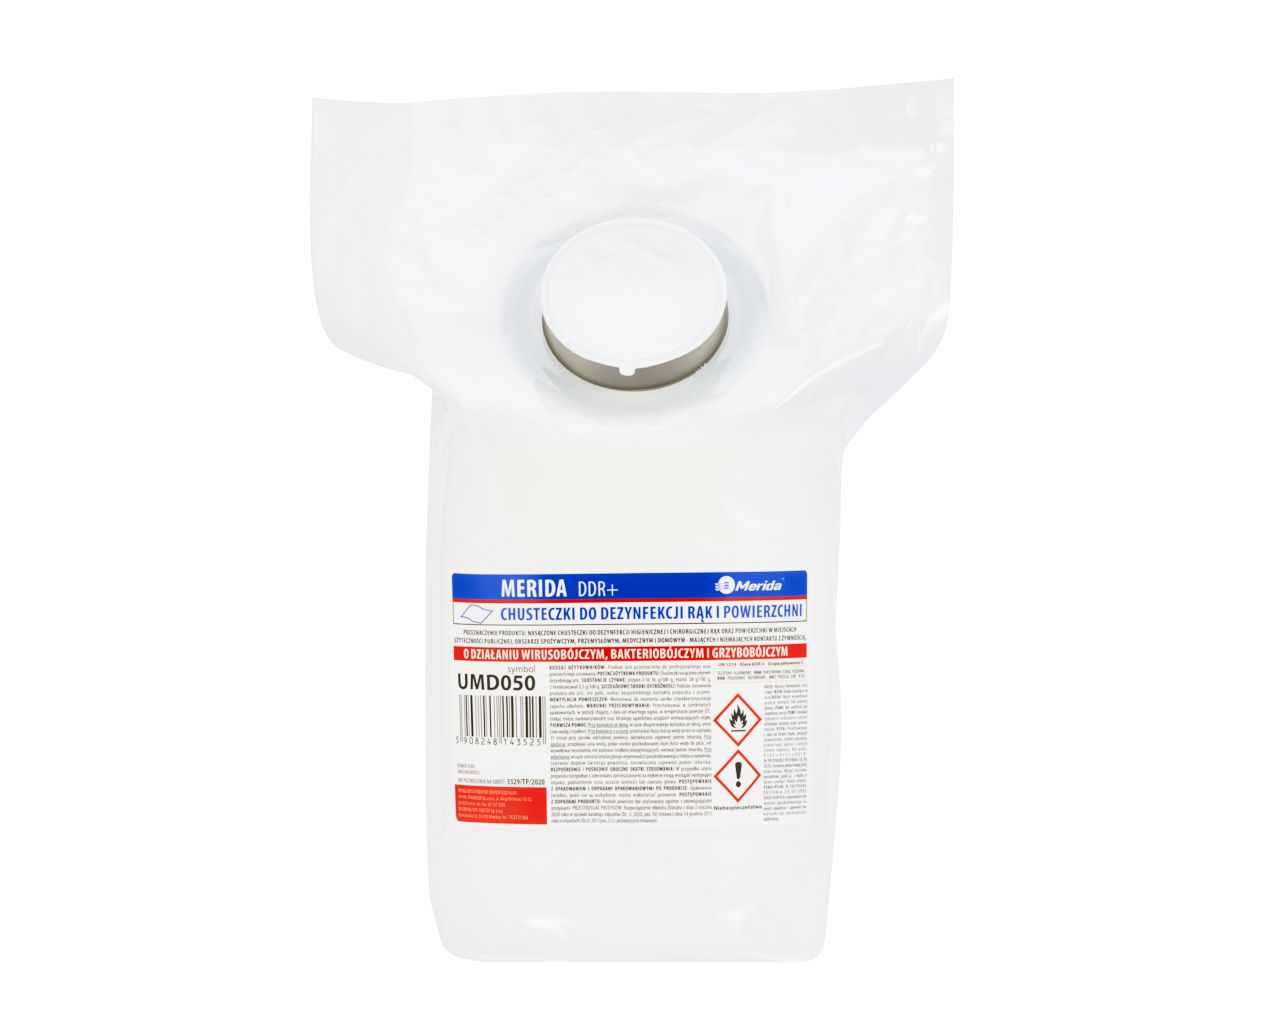 MERIDA DDR+ hand and surface wipes for surgical and hygienic disinfection, refill for DW002 (20 m roll, 105 leaves, leaf size 17x19 cm)